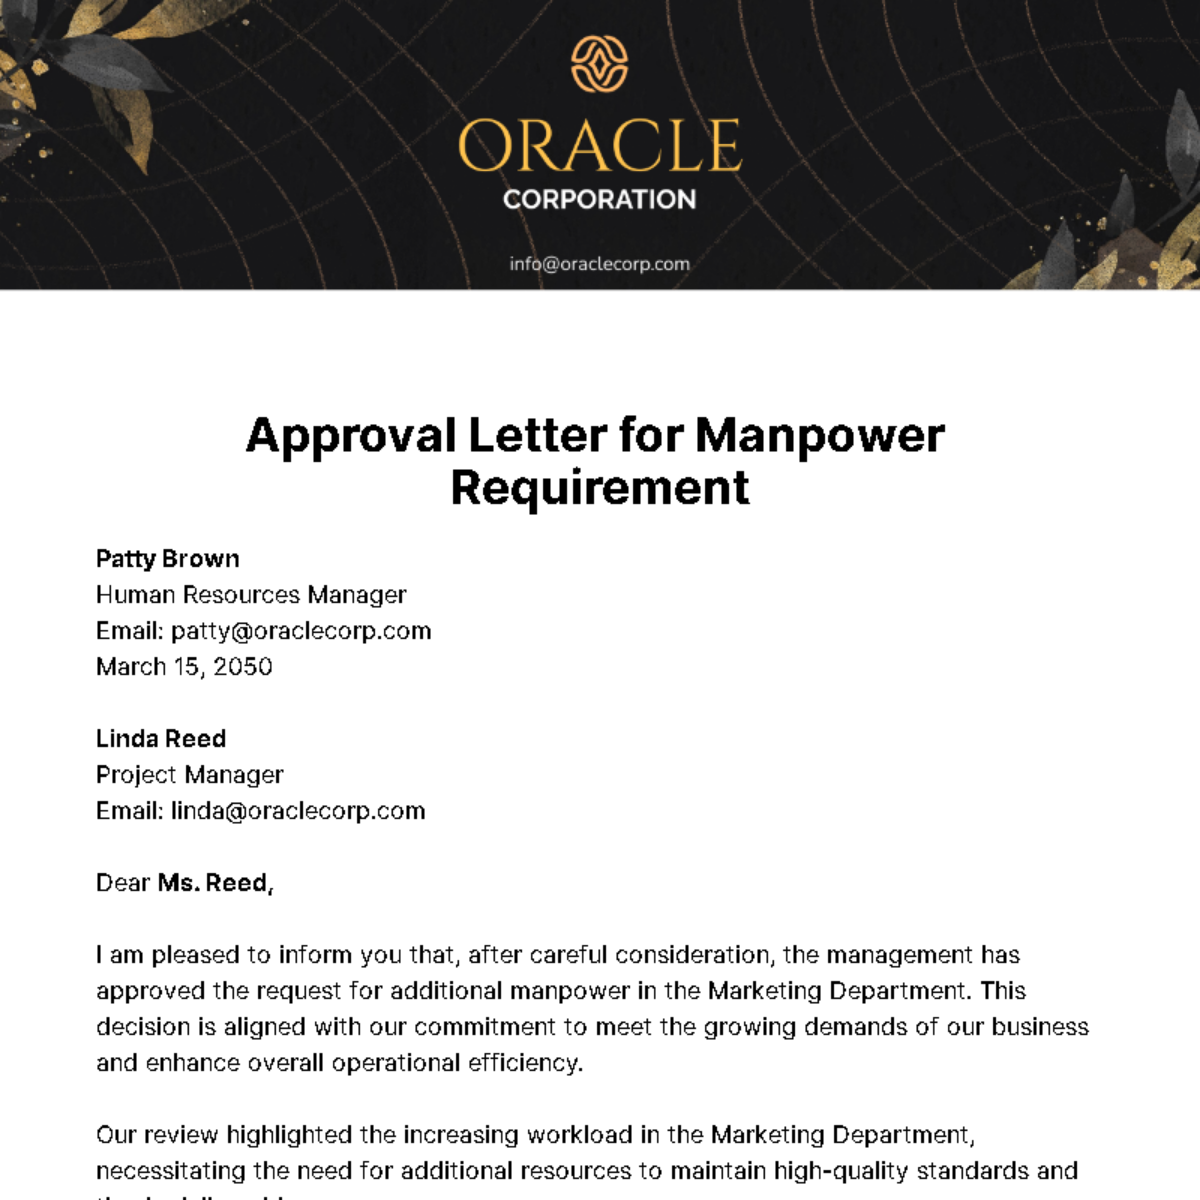 Approval Letter for Manpower Requirement Template